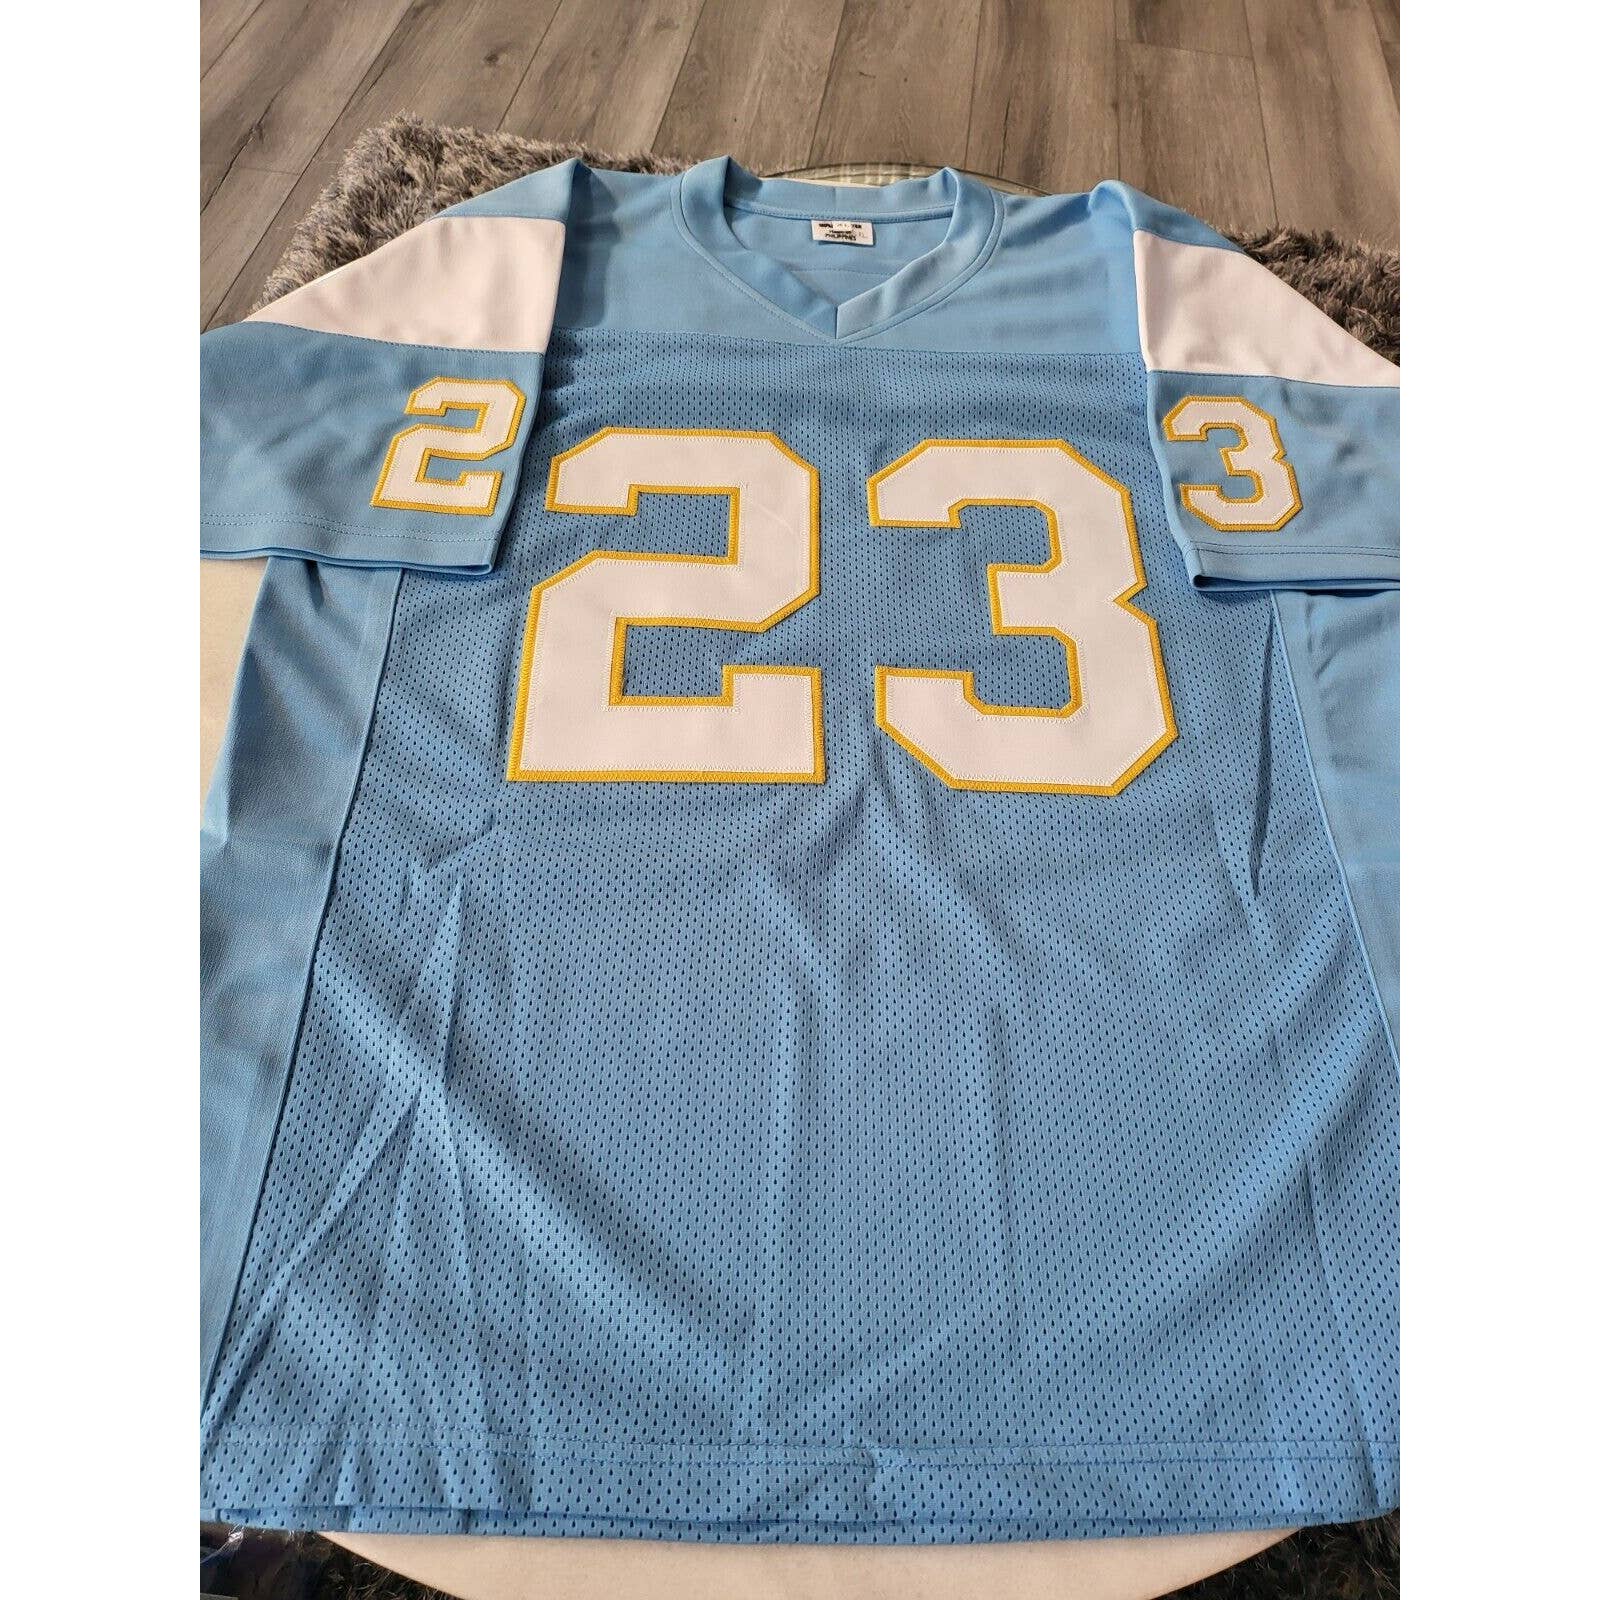 Paul Lowe Autographed/Signed Jersey San Diego Chargers Los Angeles - TreasuresEvolved